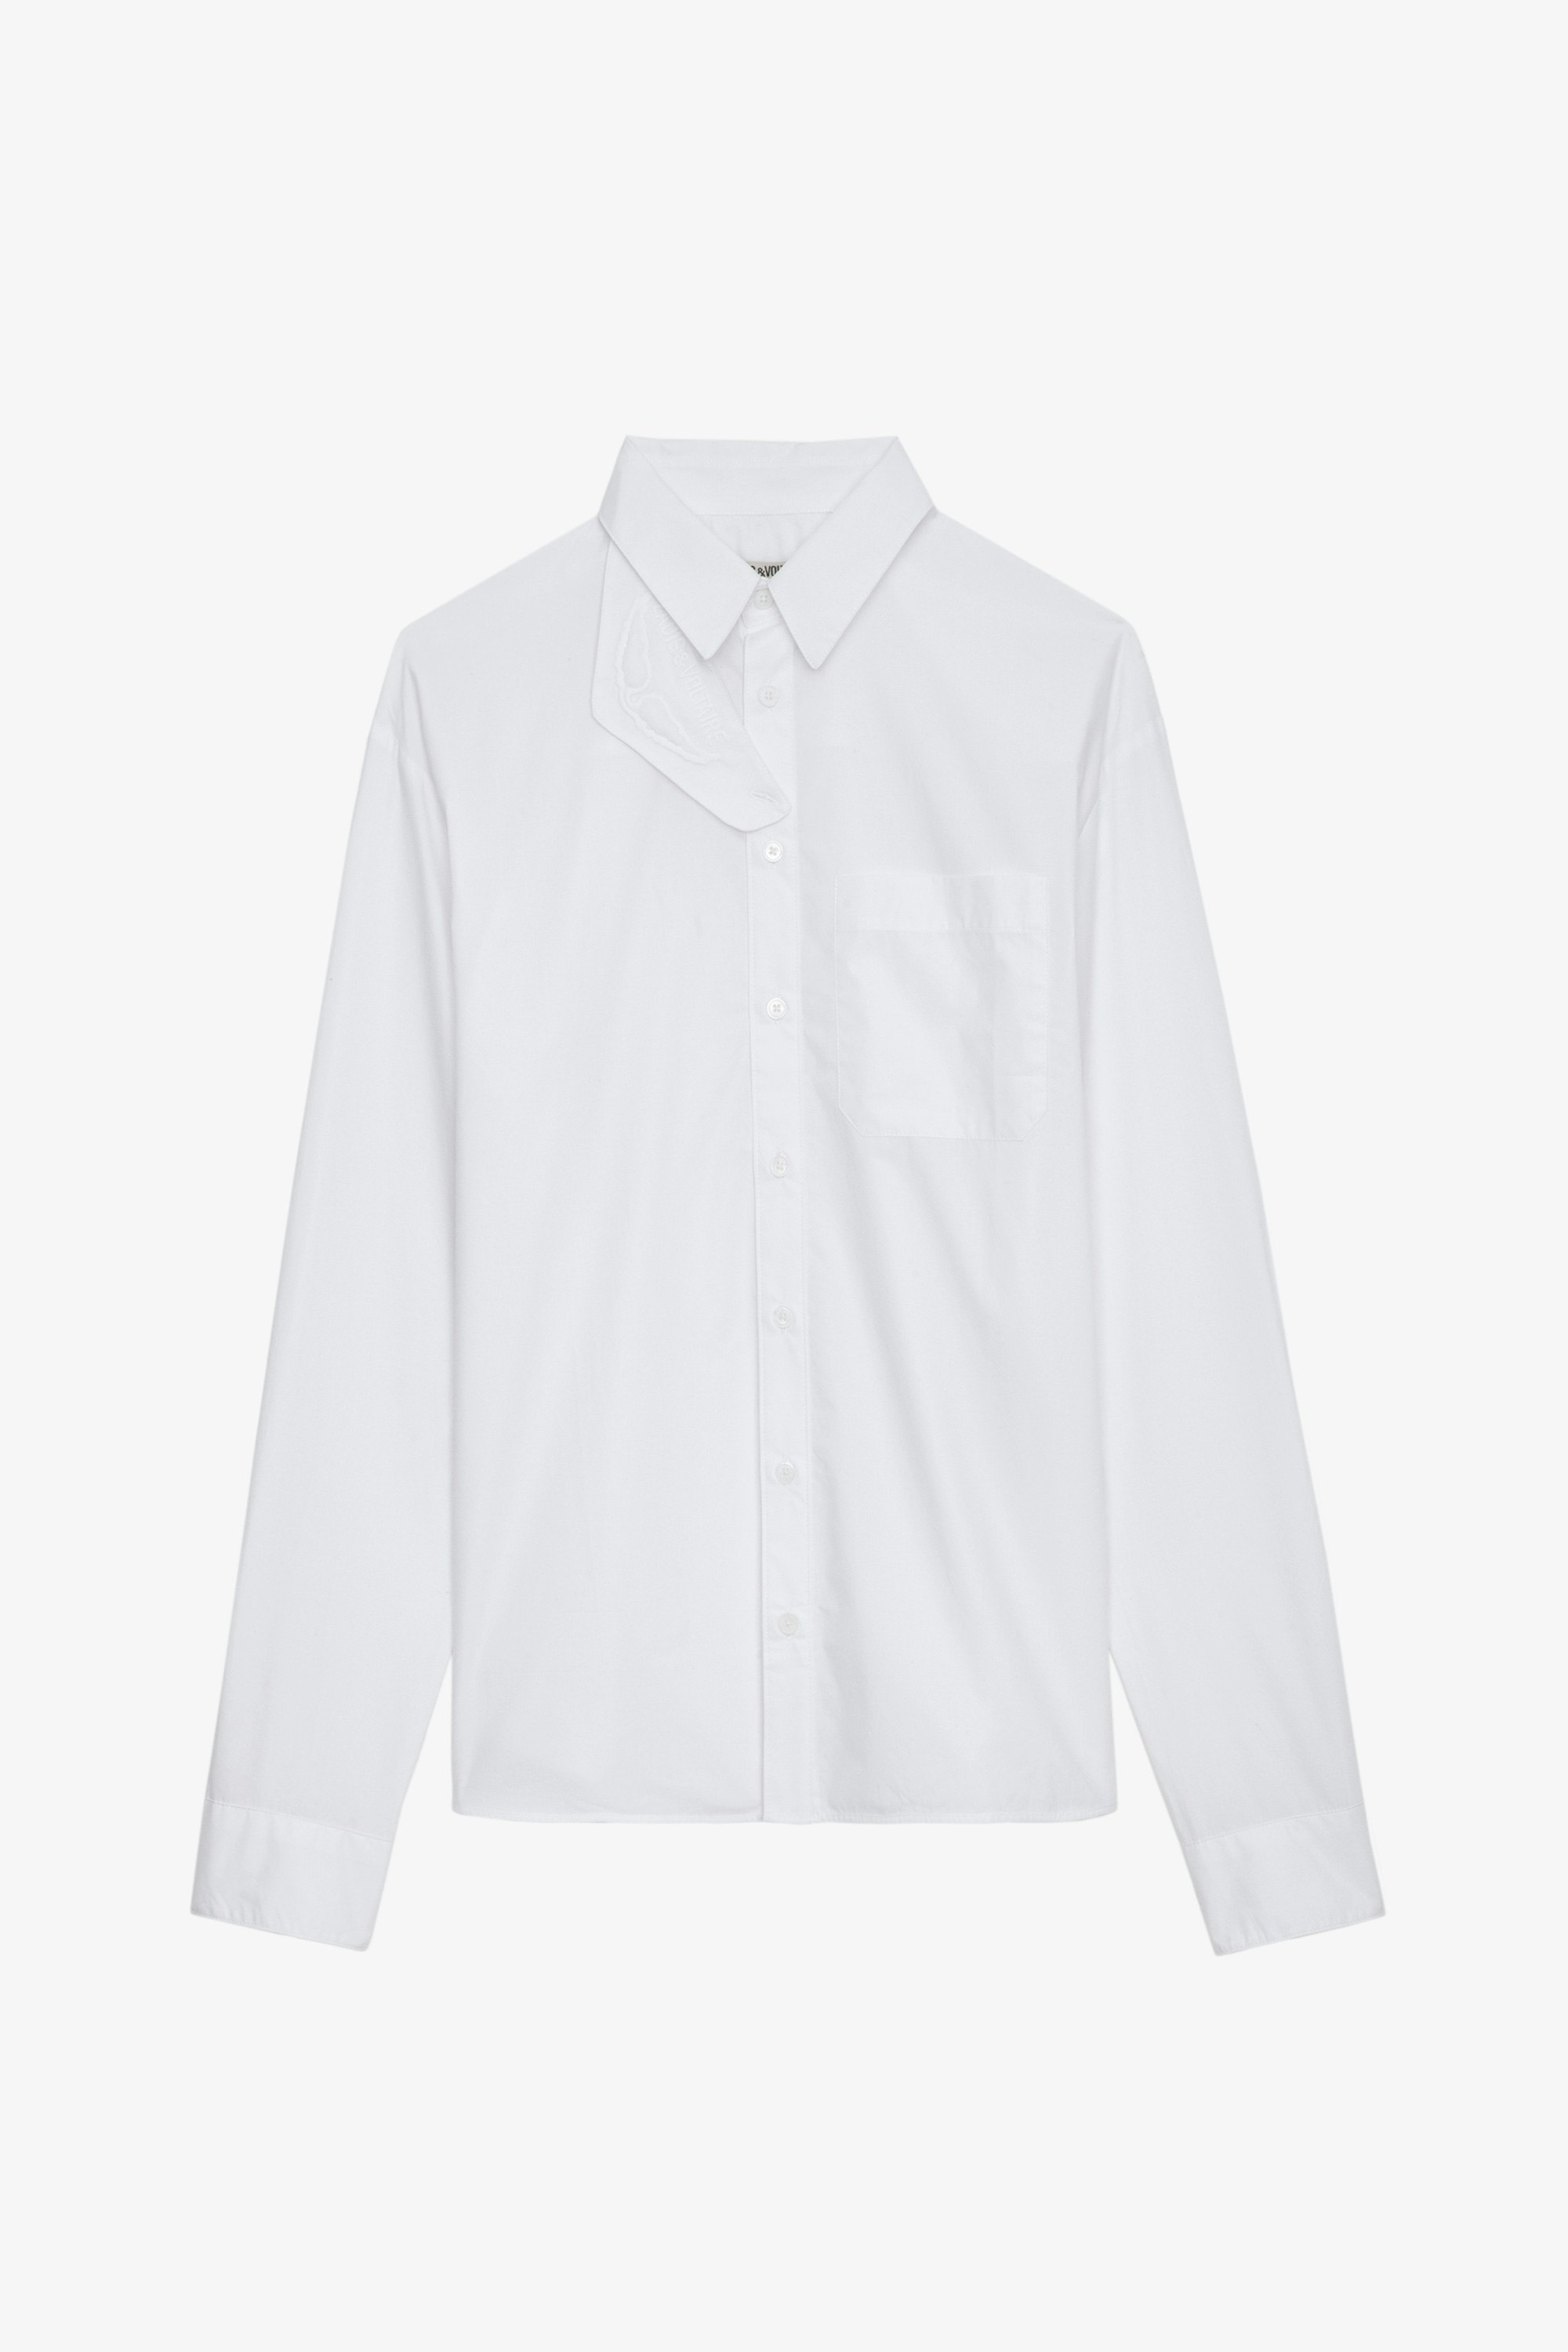 Tyrone Shirt - White cotton long shirt with button closure, pockets and removable decorative collar band.